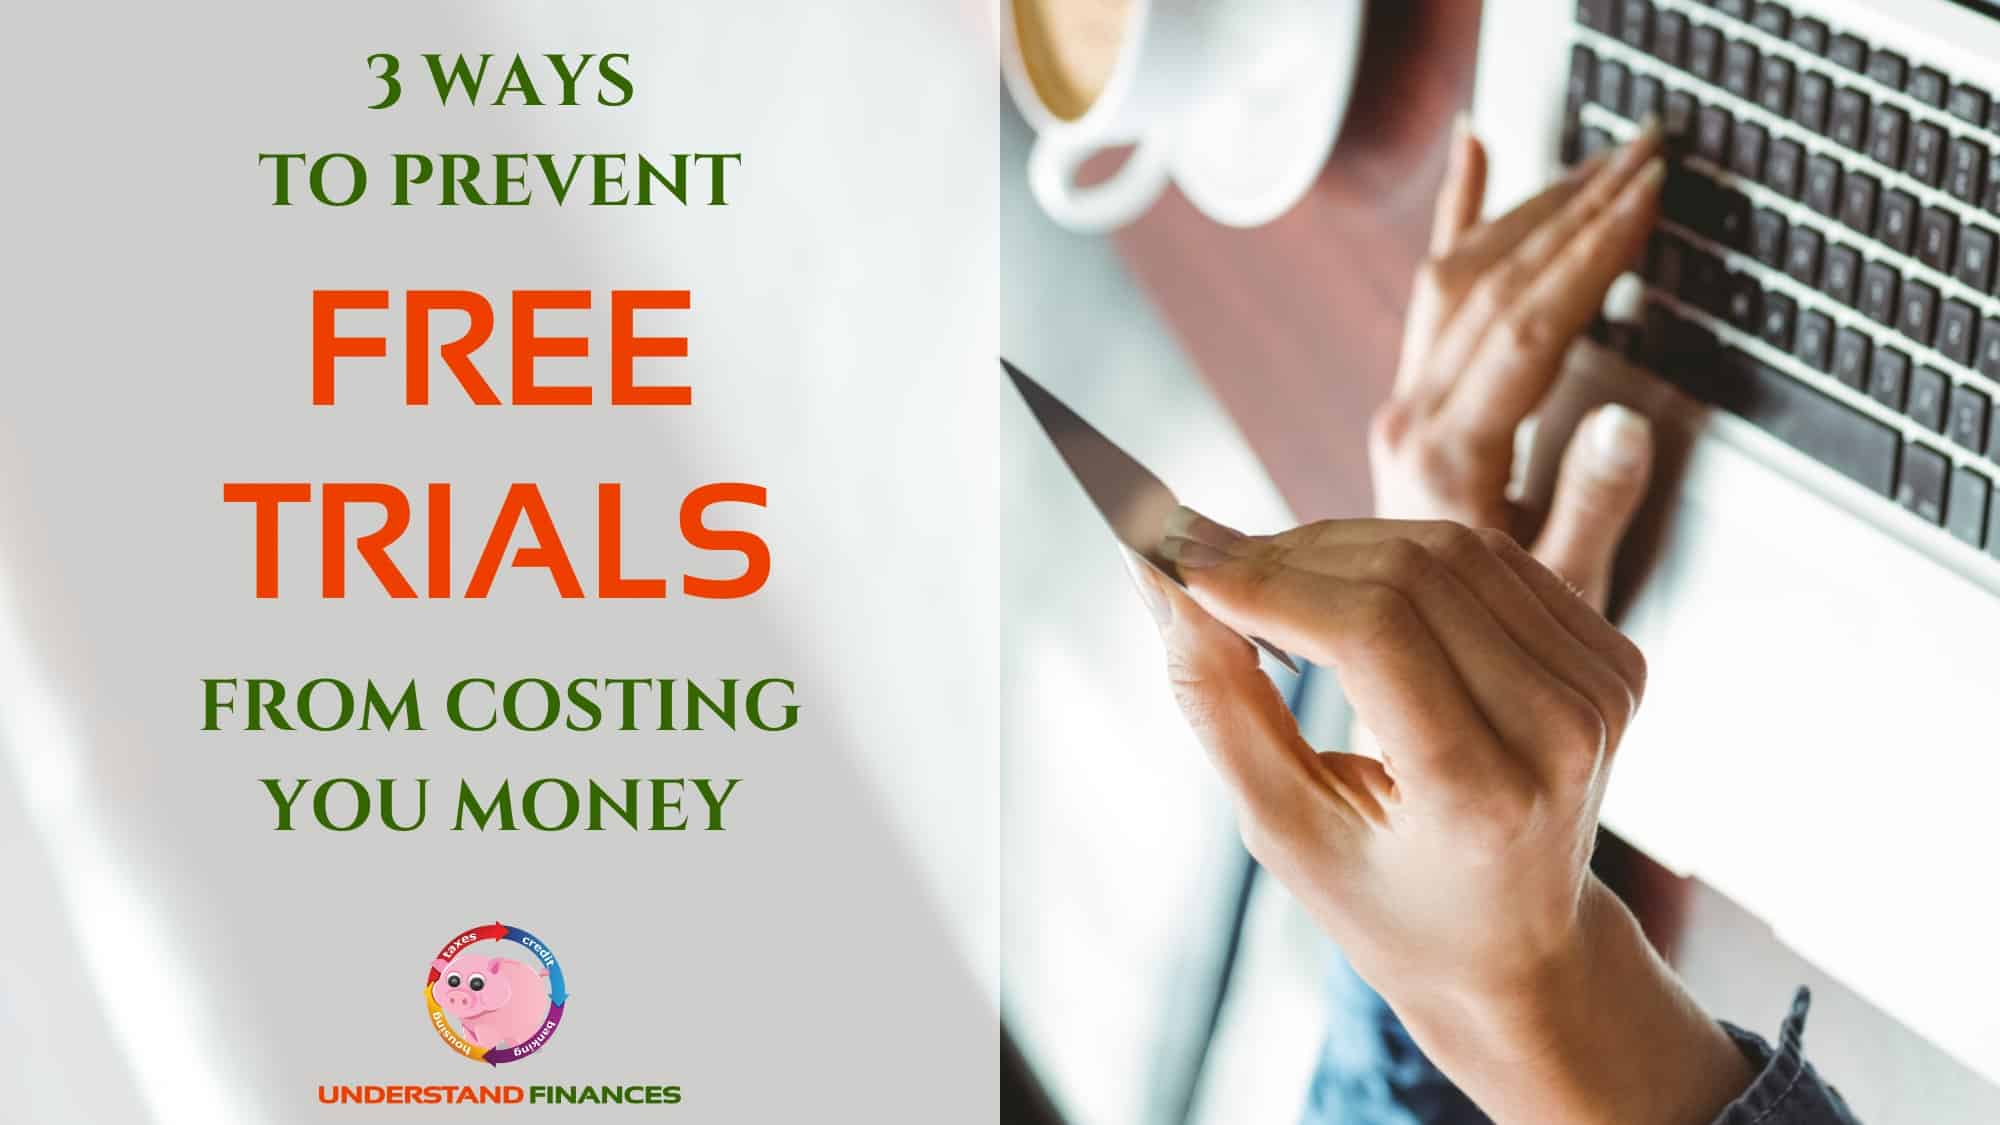 3 Ways To Prevent Free Trials From Costing You Money